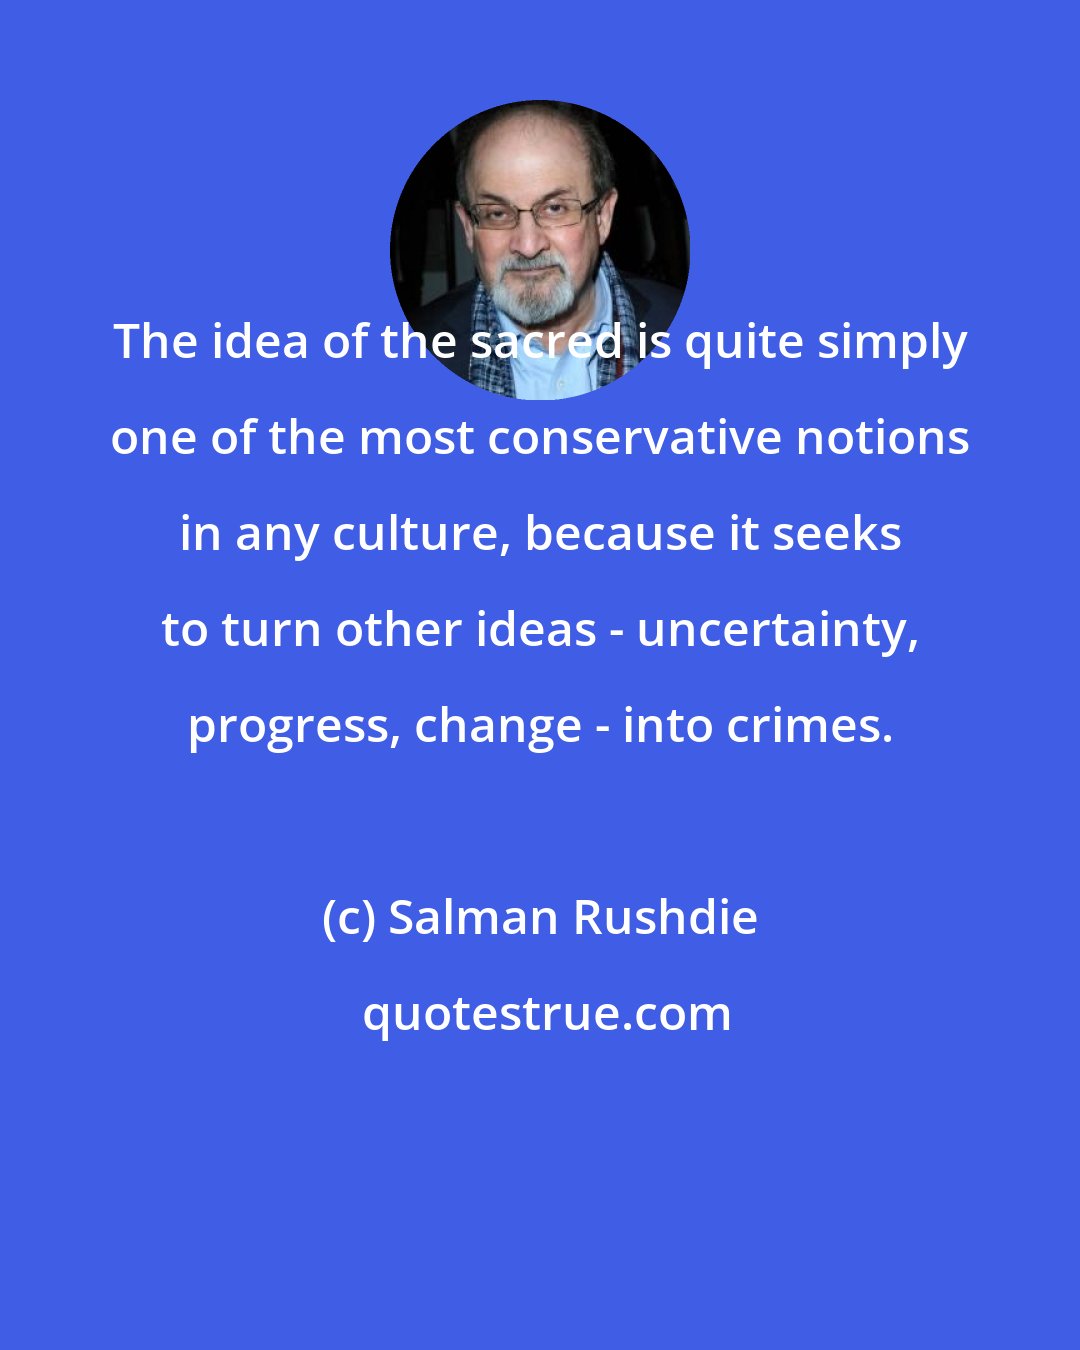 Salman Rushdie: The idea of the sacred is quite simply one of the most conservative notions in any culture, because it seeks to turn other ideas - uncertainty, progress, change - into crimes.